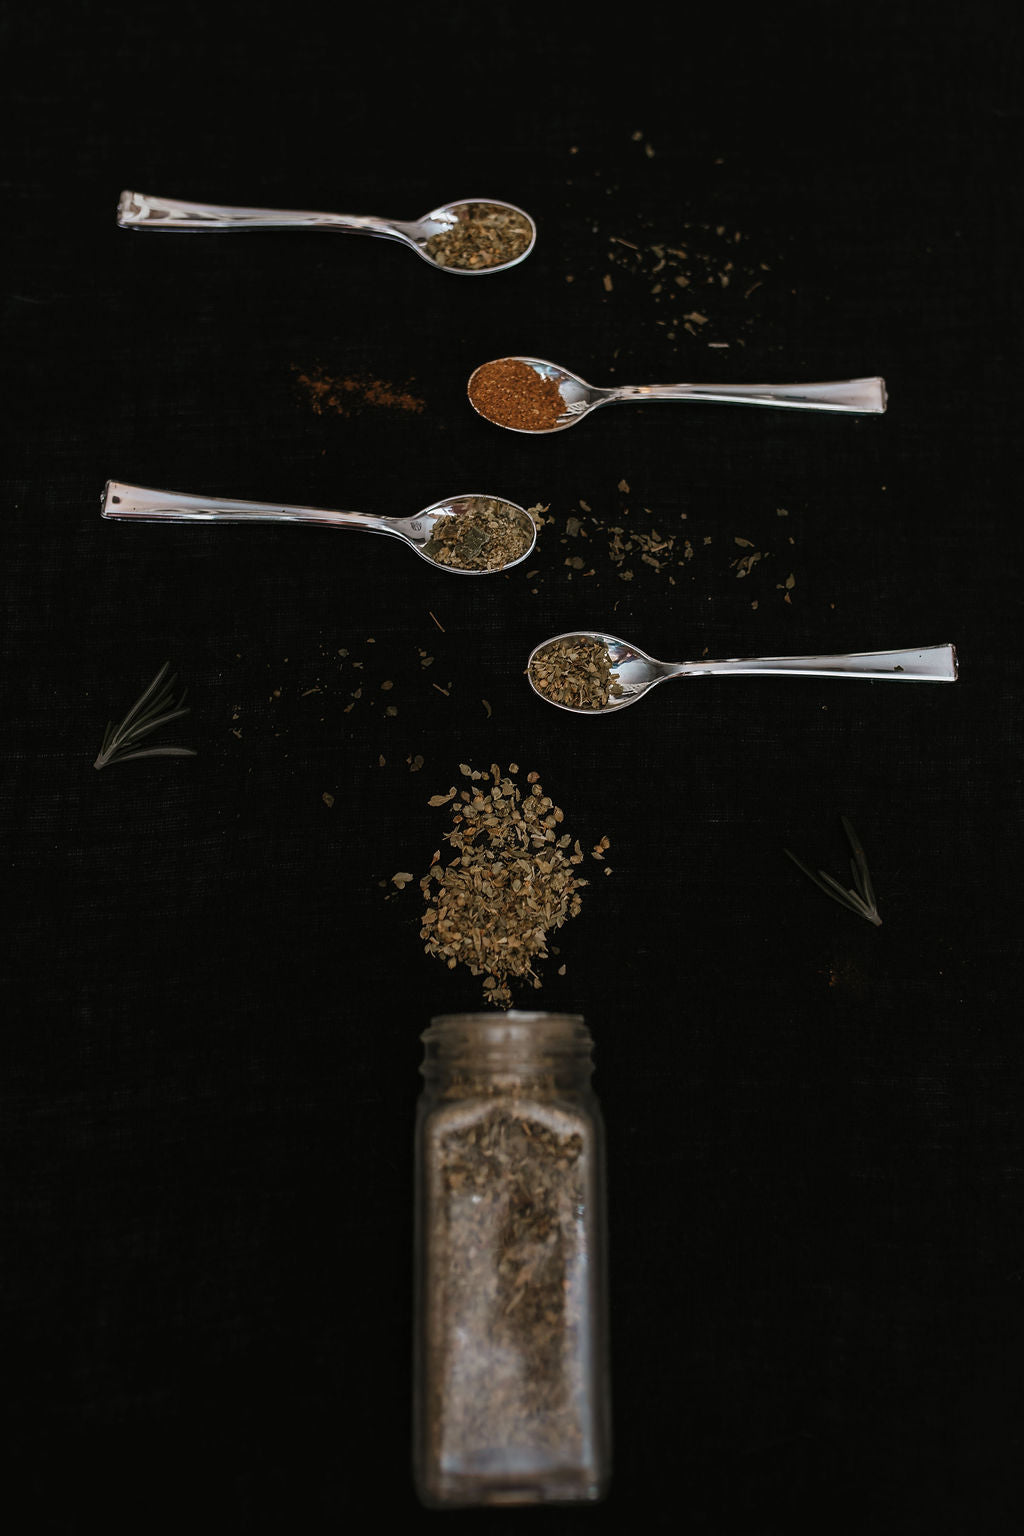 spices, spoons, spoons with spices, Spices, Pinterest, Spoon and